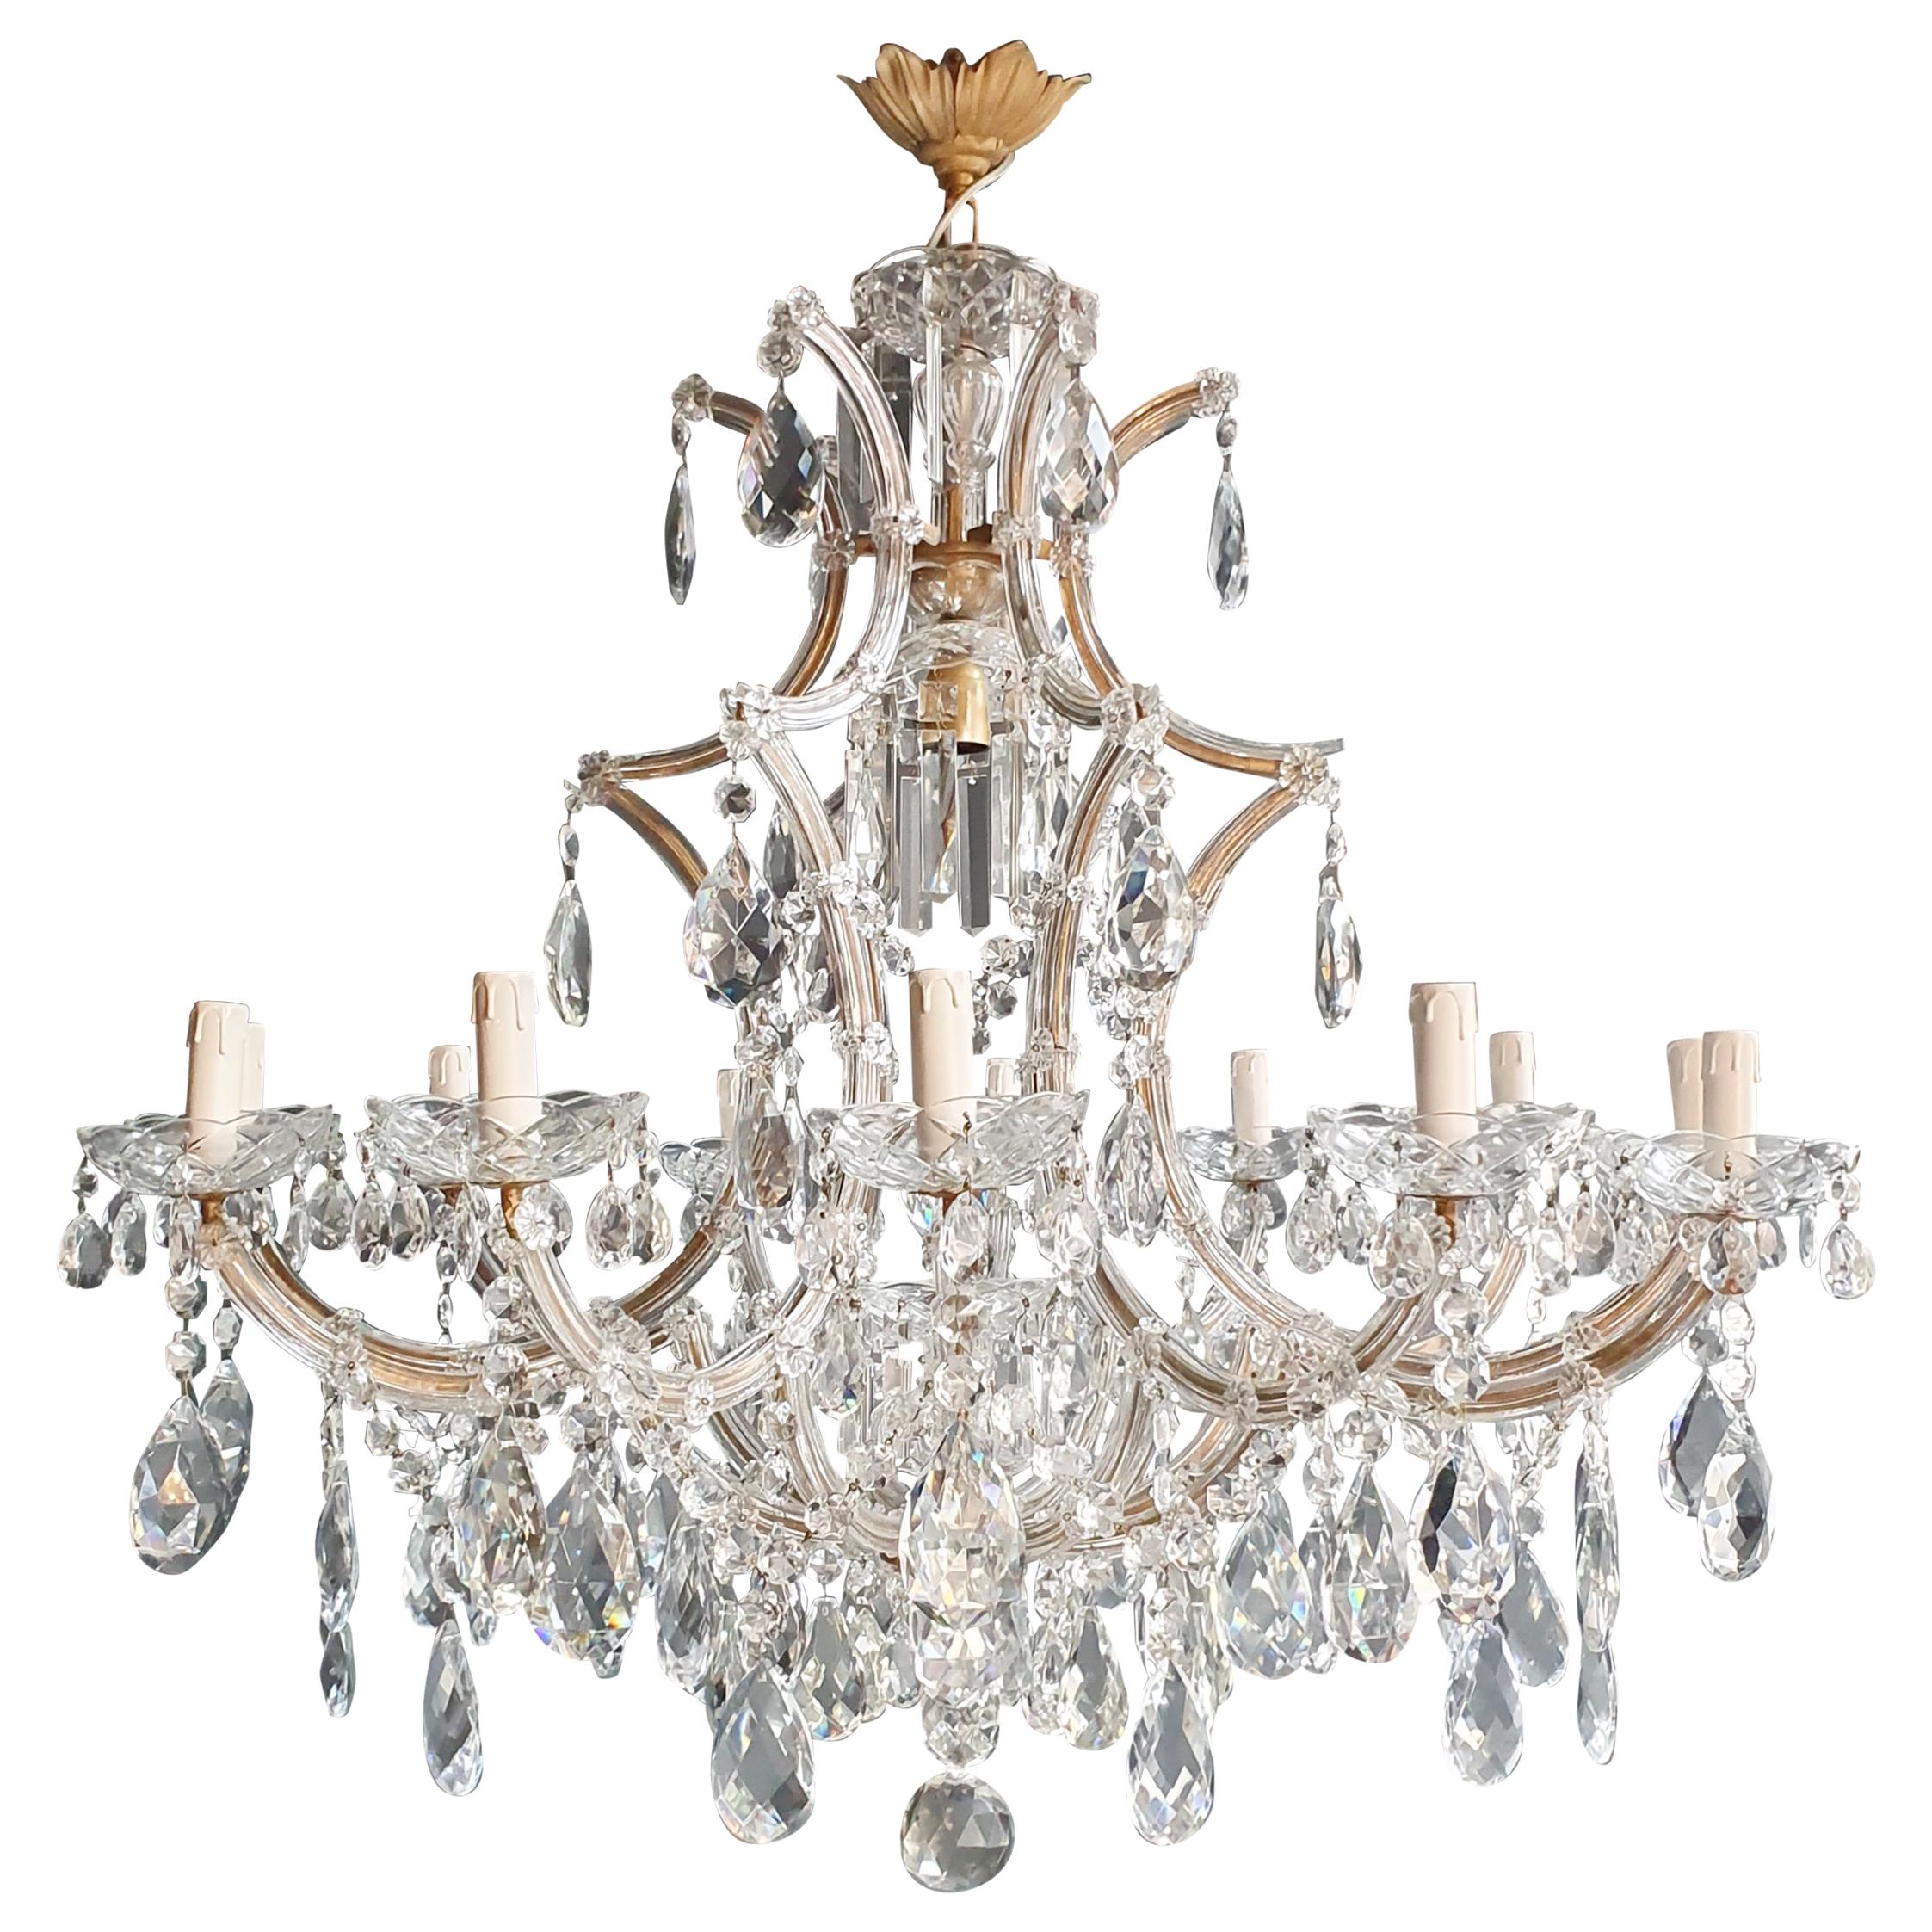 Maria Theresa Crystal Chandelier Antique Ceiling Lamp Luster Art ...